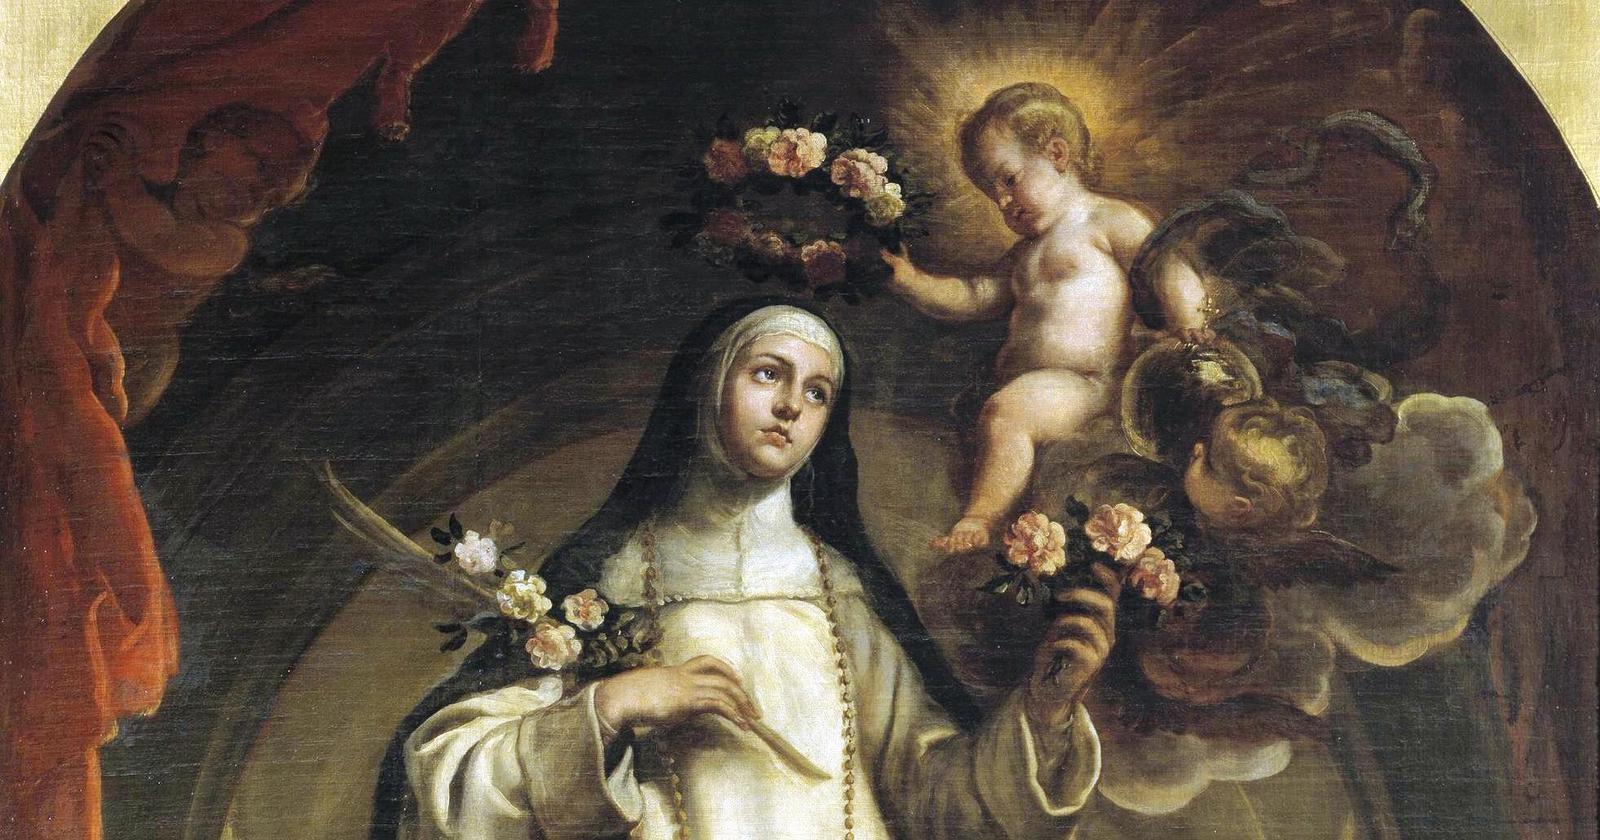 Saint Rose of Lima (1586-1617): The inspiration for the College's name |  The College of Saint Rose